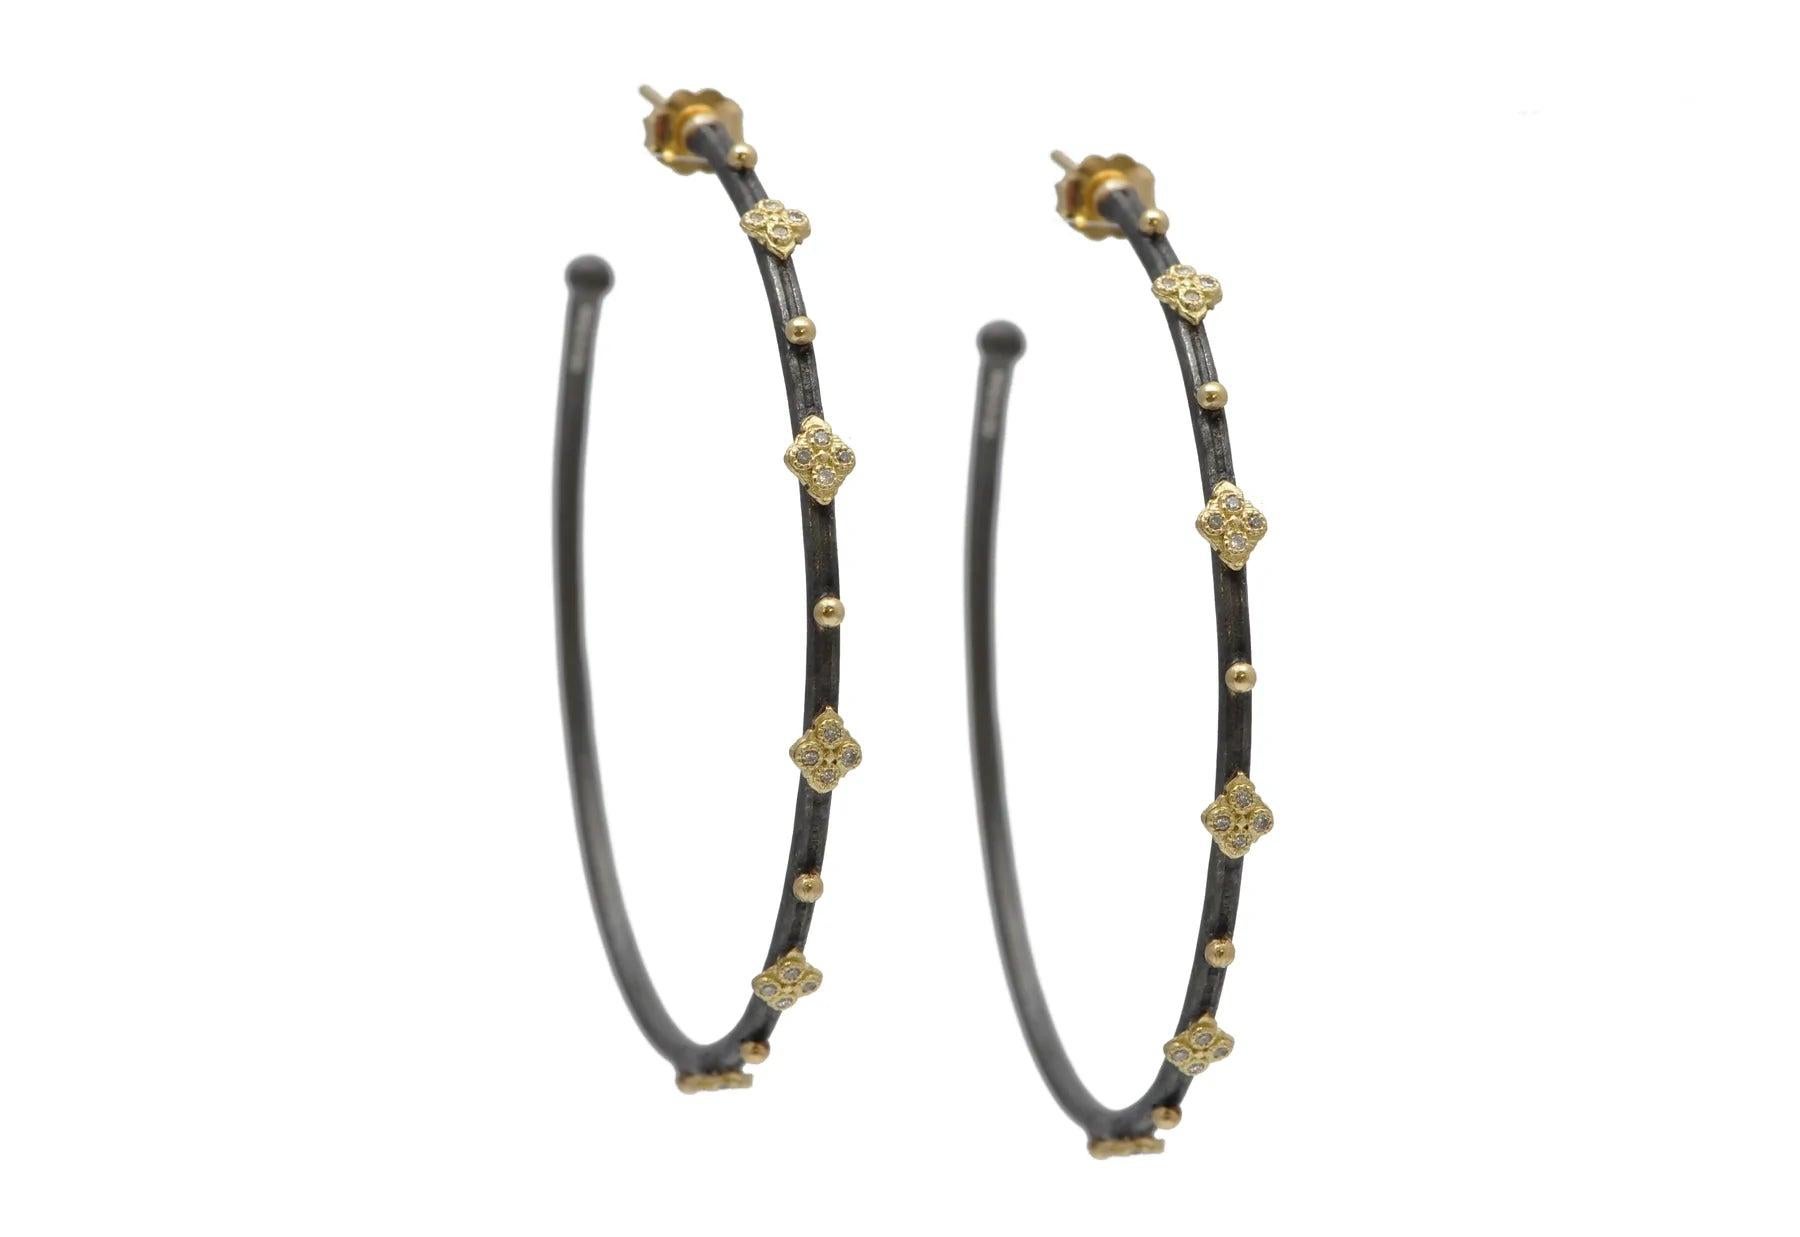 These beautiful 52 mm hoops are crafted in 18 karat yellow gold and blackened sterling silver.
The diamonds weigh a total of 0.24 carats. 


